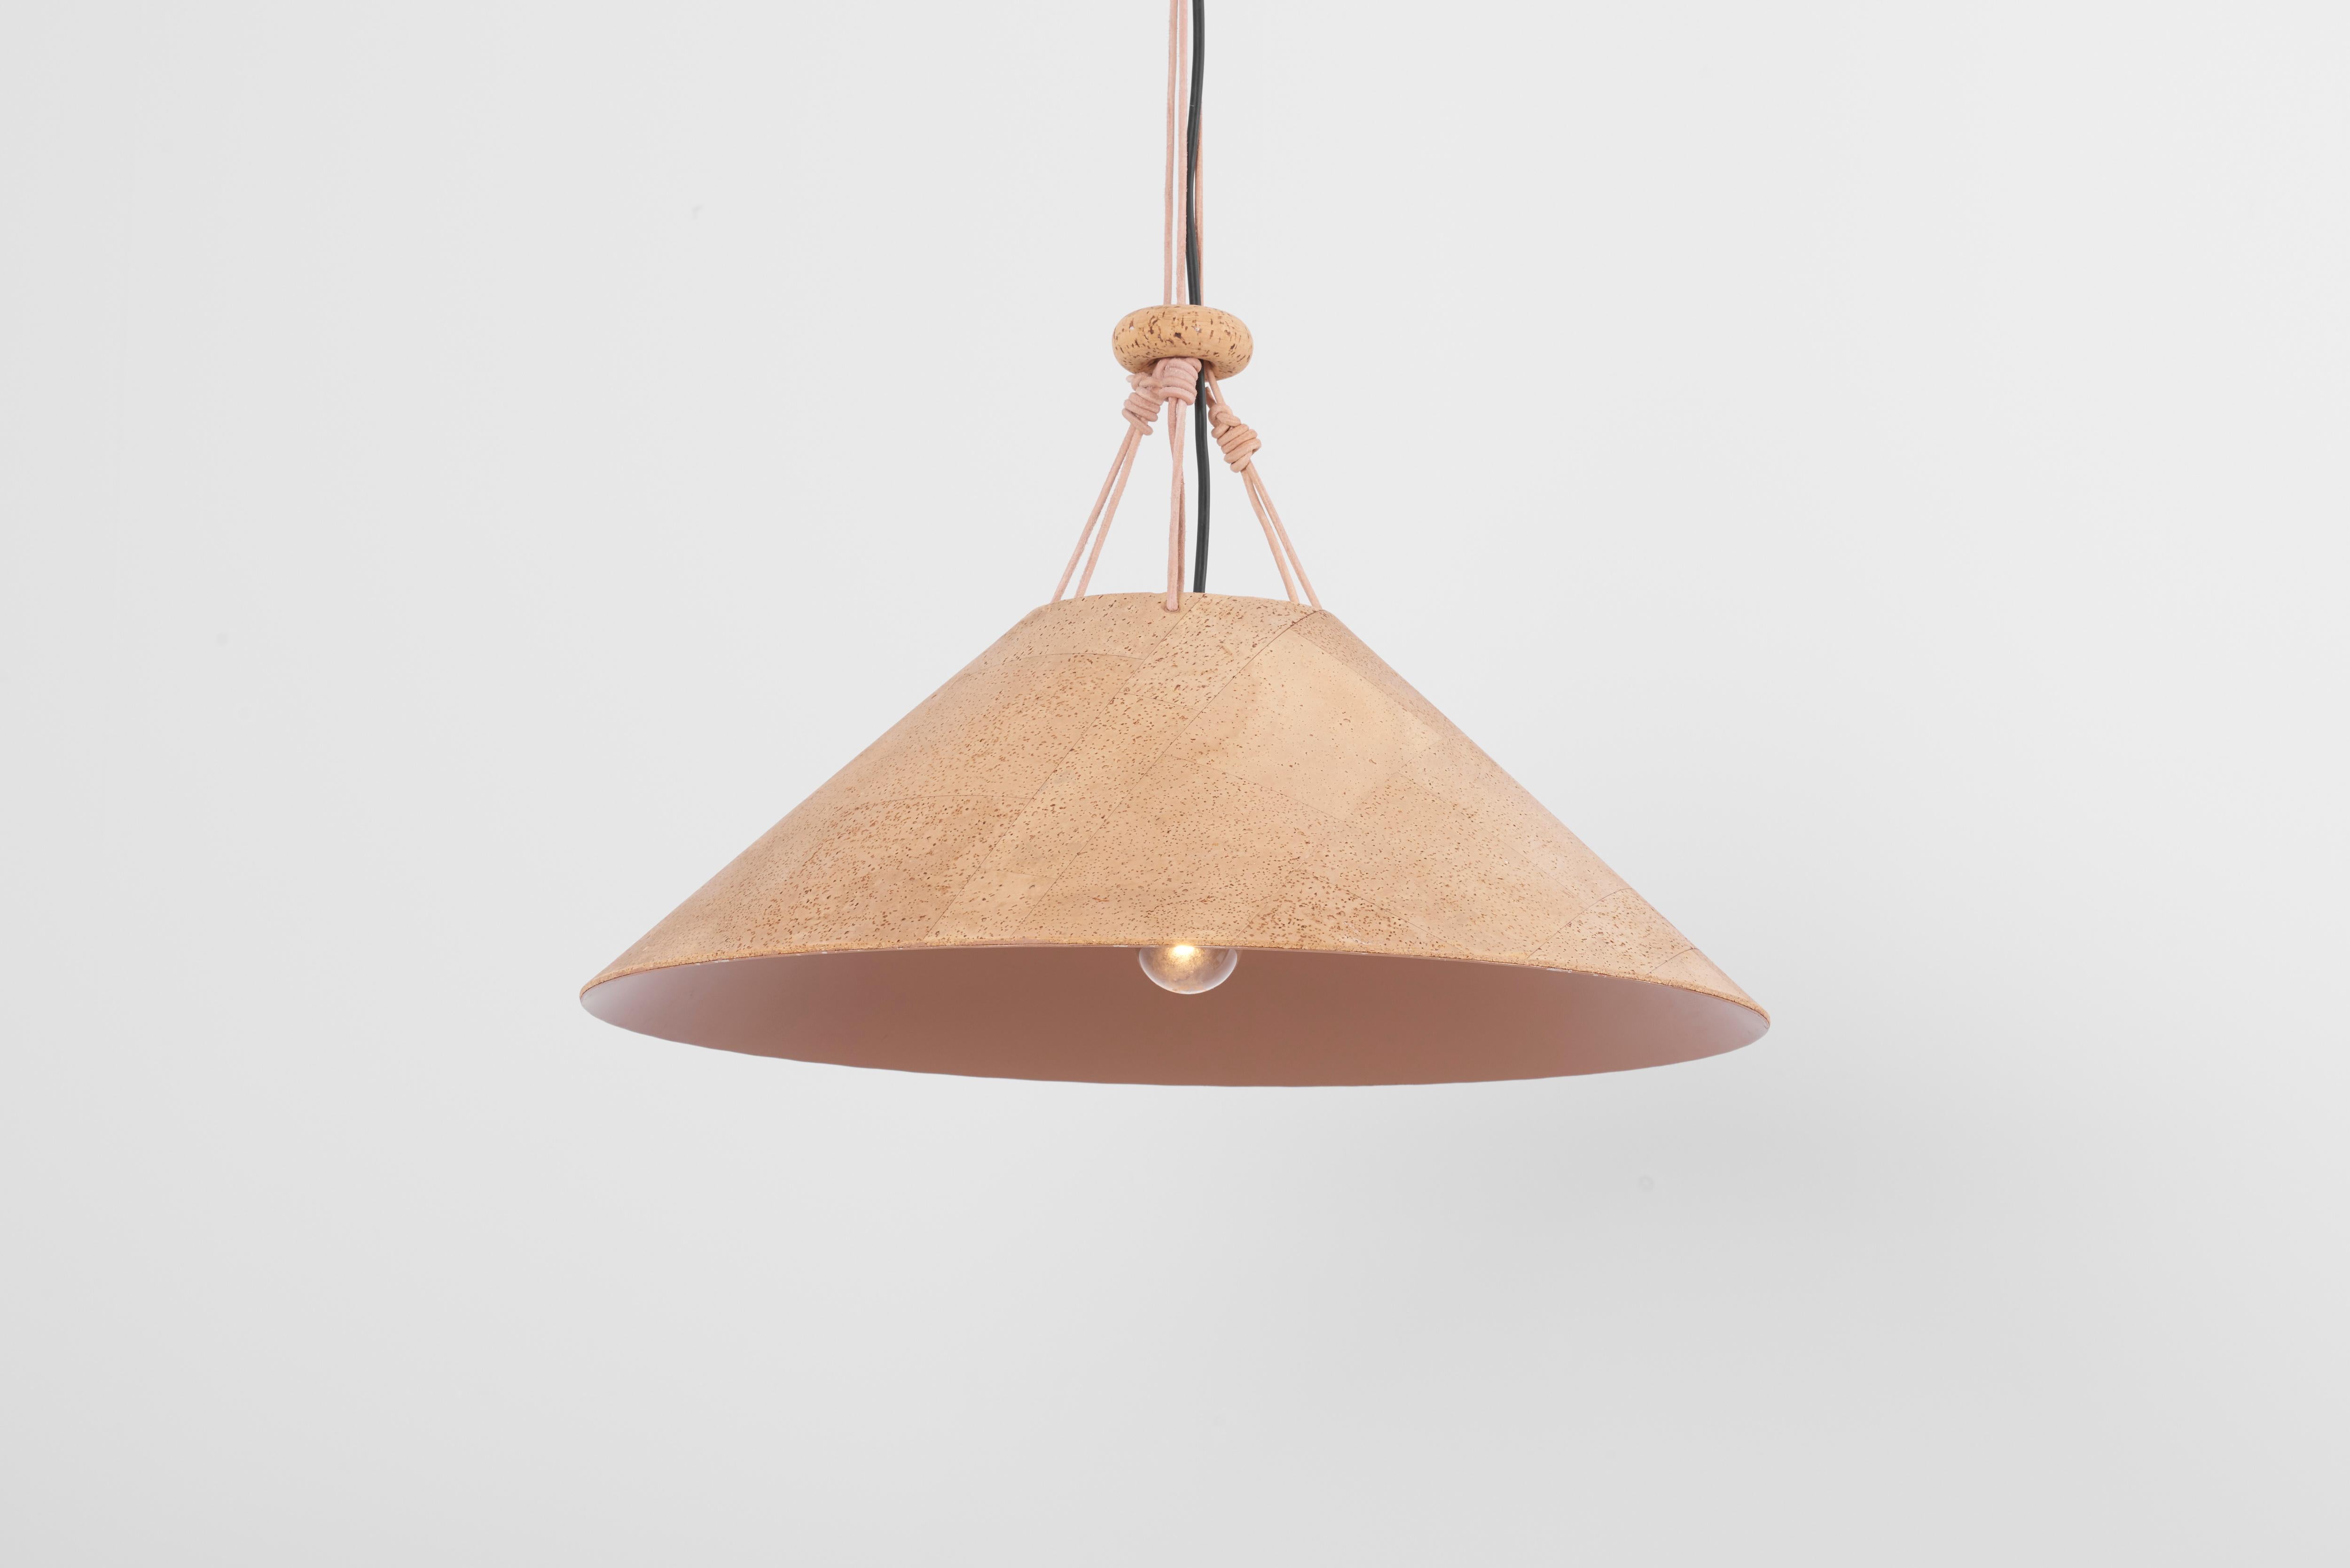 Rare pendant lamp in cork with leather strings by Wilhelm Zannoth for Ingo Maurer.

1 x E27 socket.

Please note: Lamp should be fitted professionally in accordance to local requirements.